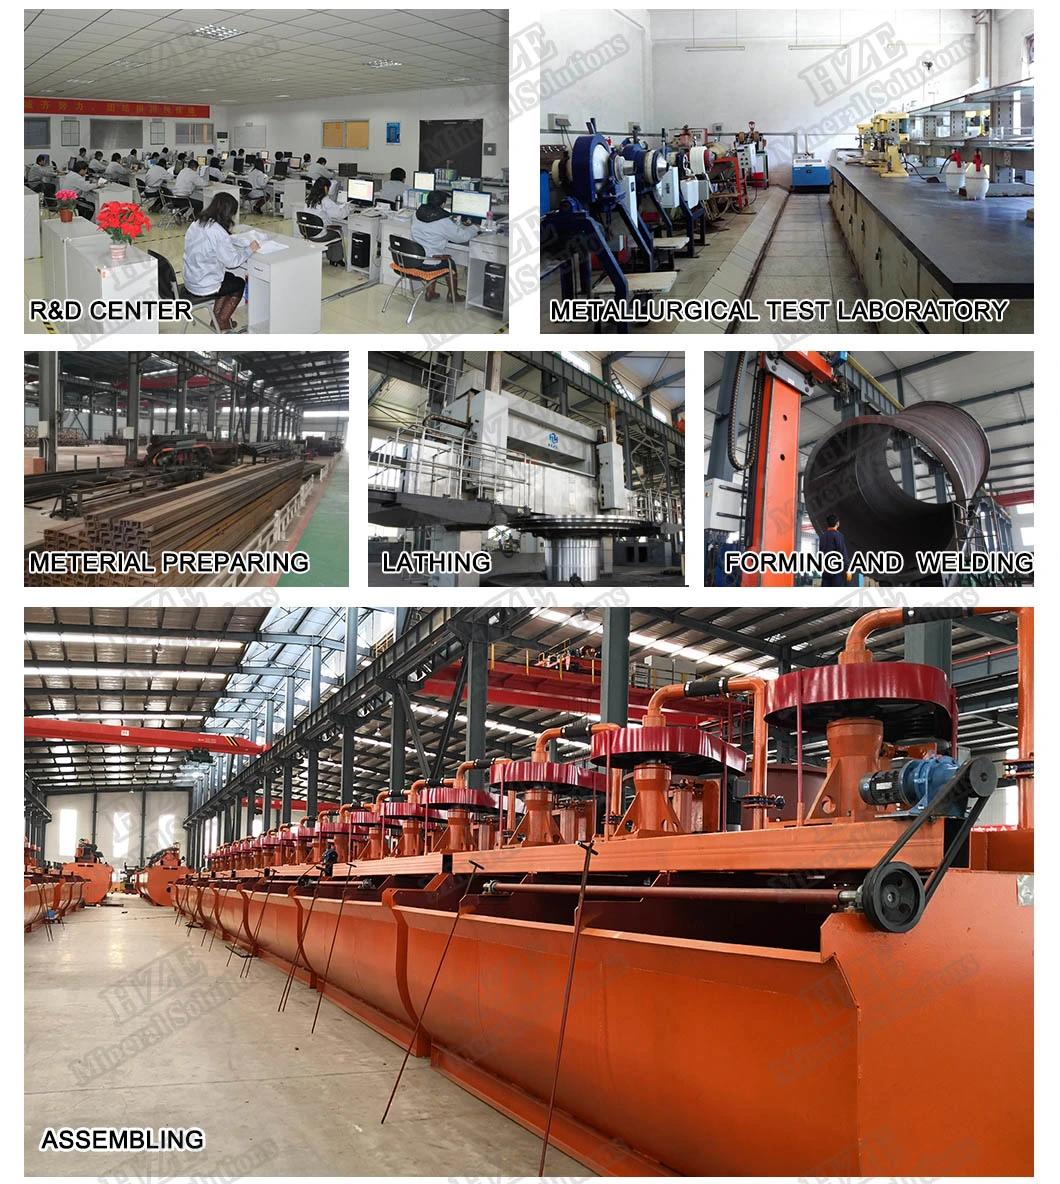 Small Size Crushing Equipment Jaw Crusher of Gold Mineral Processing Plant